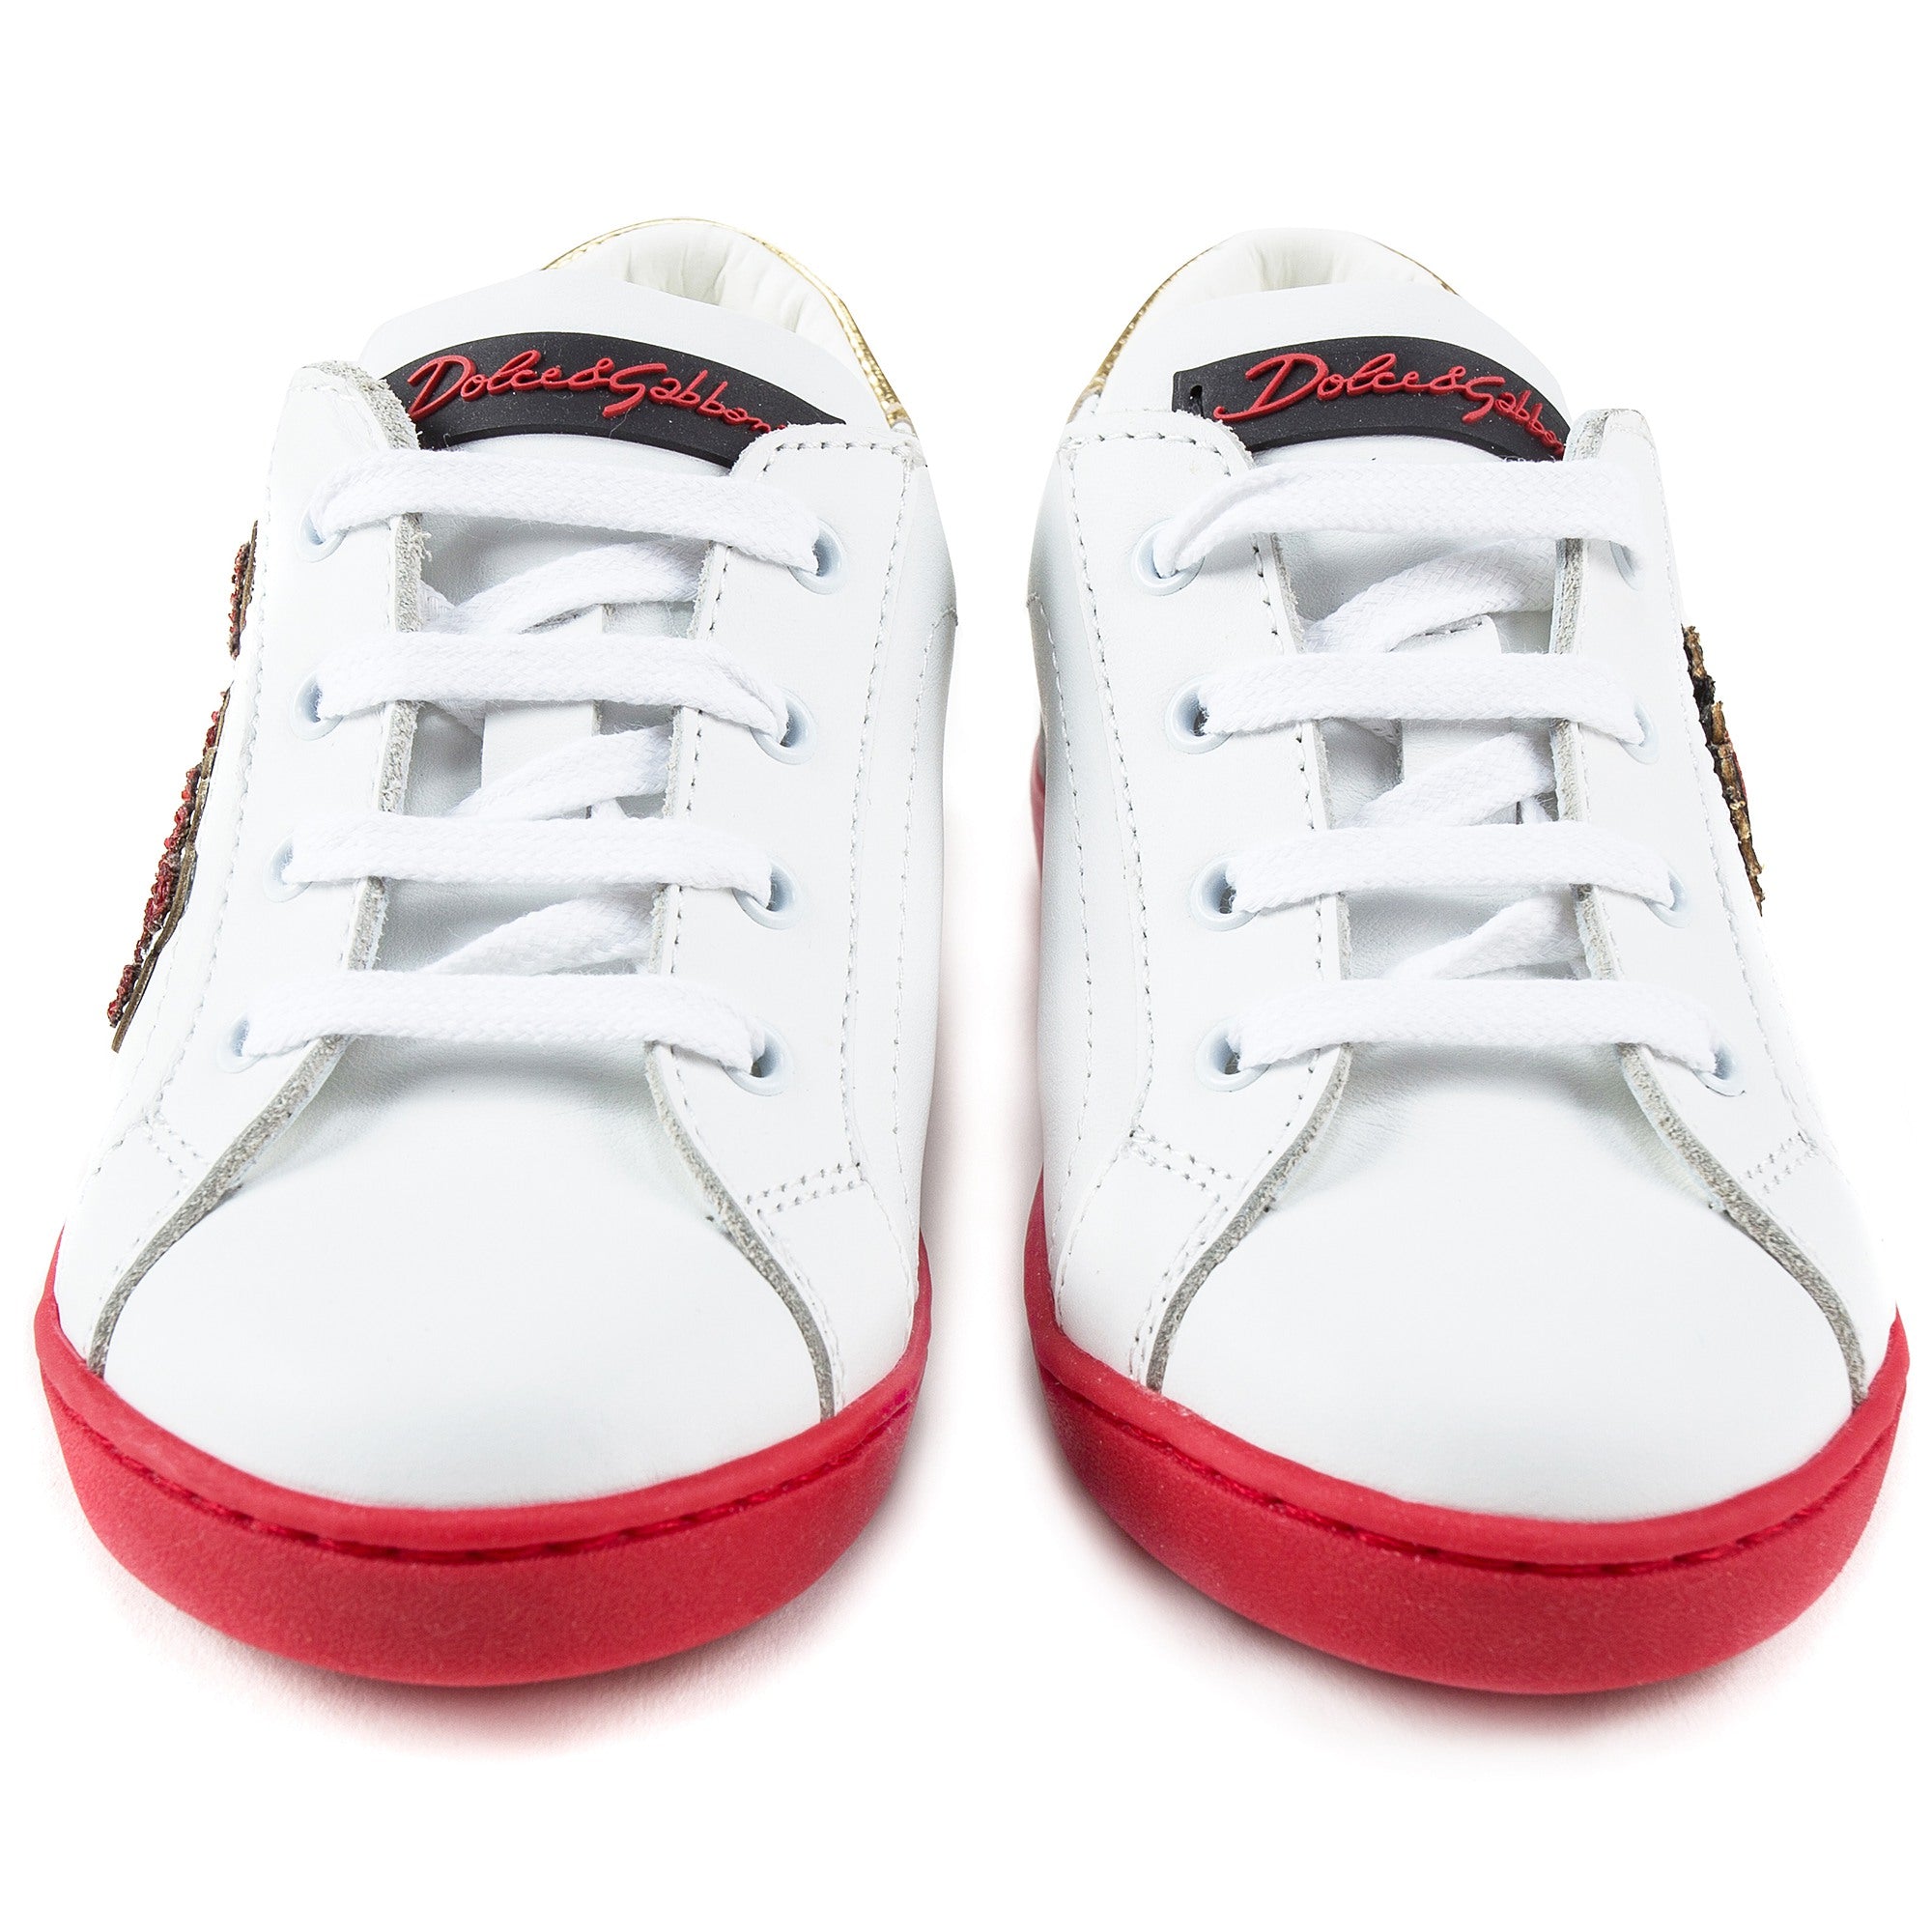 Girls White Leather "Love" Shoes